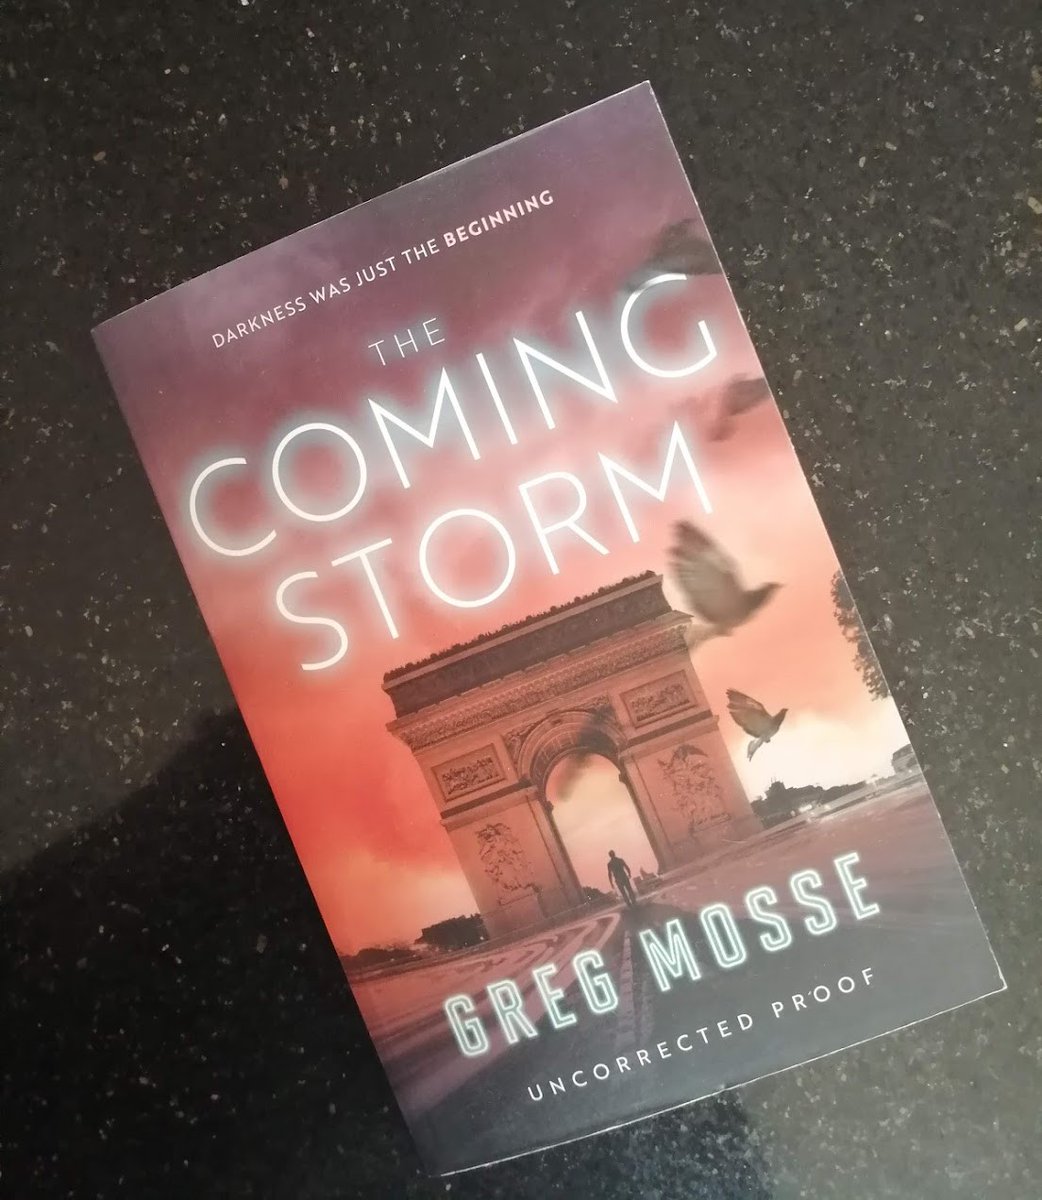 Happy publication day to the wonderful @GregMosse whose ecothriller #TheComingStorm is out today! A fast-paced, twisty thriller that delves into some seriously frightening issues around climate & tech wrapped up in devilish eco-terrorist subterfuge. It's a nailbiter! Order now!